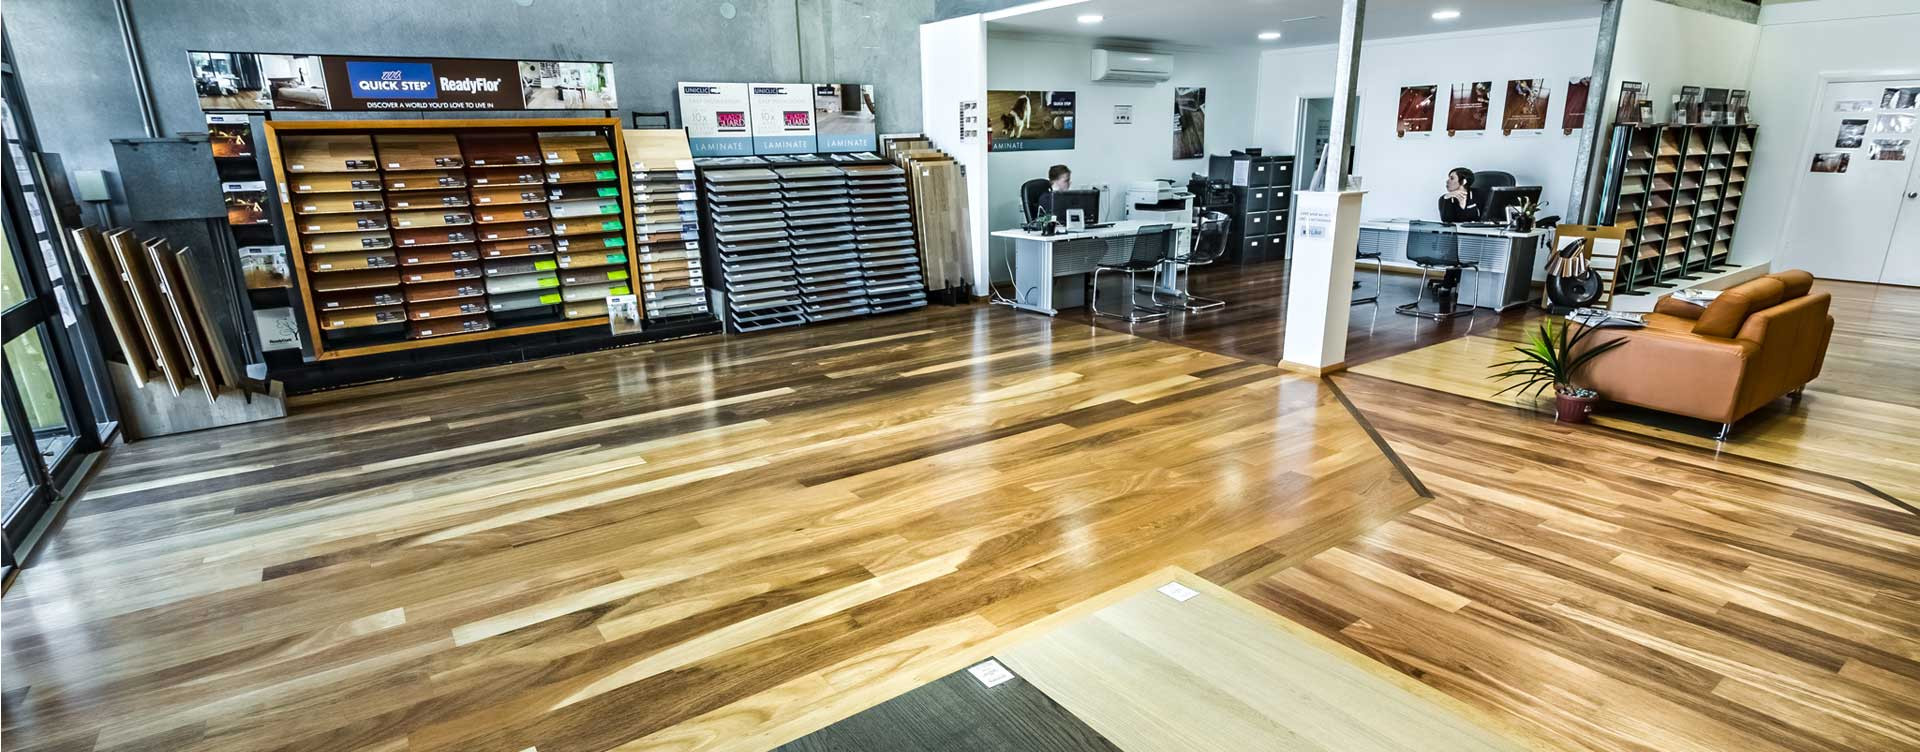 16 Great Hardwood Floor Repair Companies 2024 free download hardwood floor repair companies of timber flooring perth coastal flooring wa quality wooden inside thats why they call us the home of fine wood floors